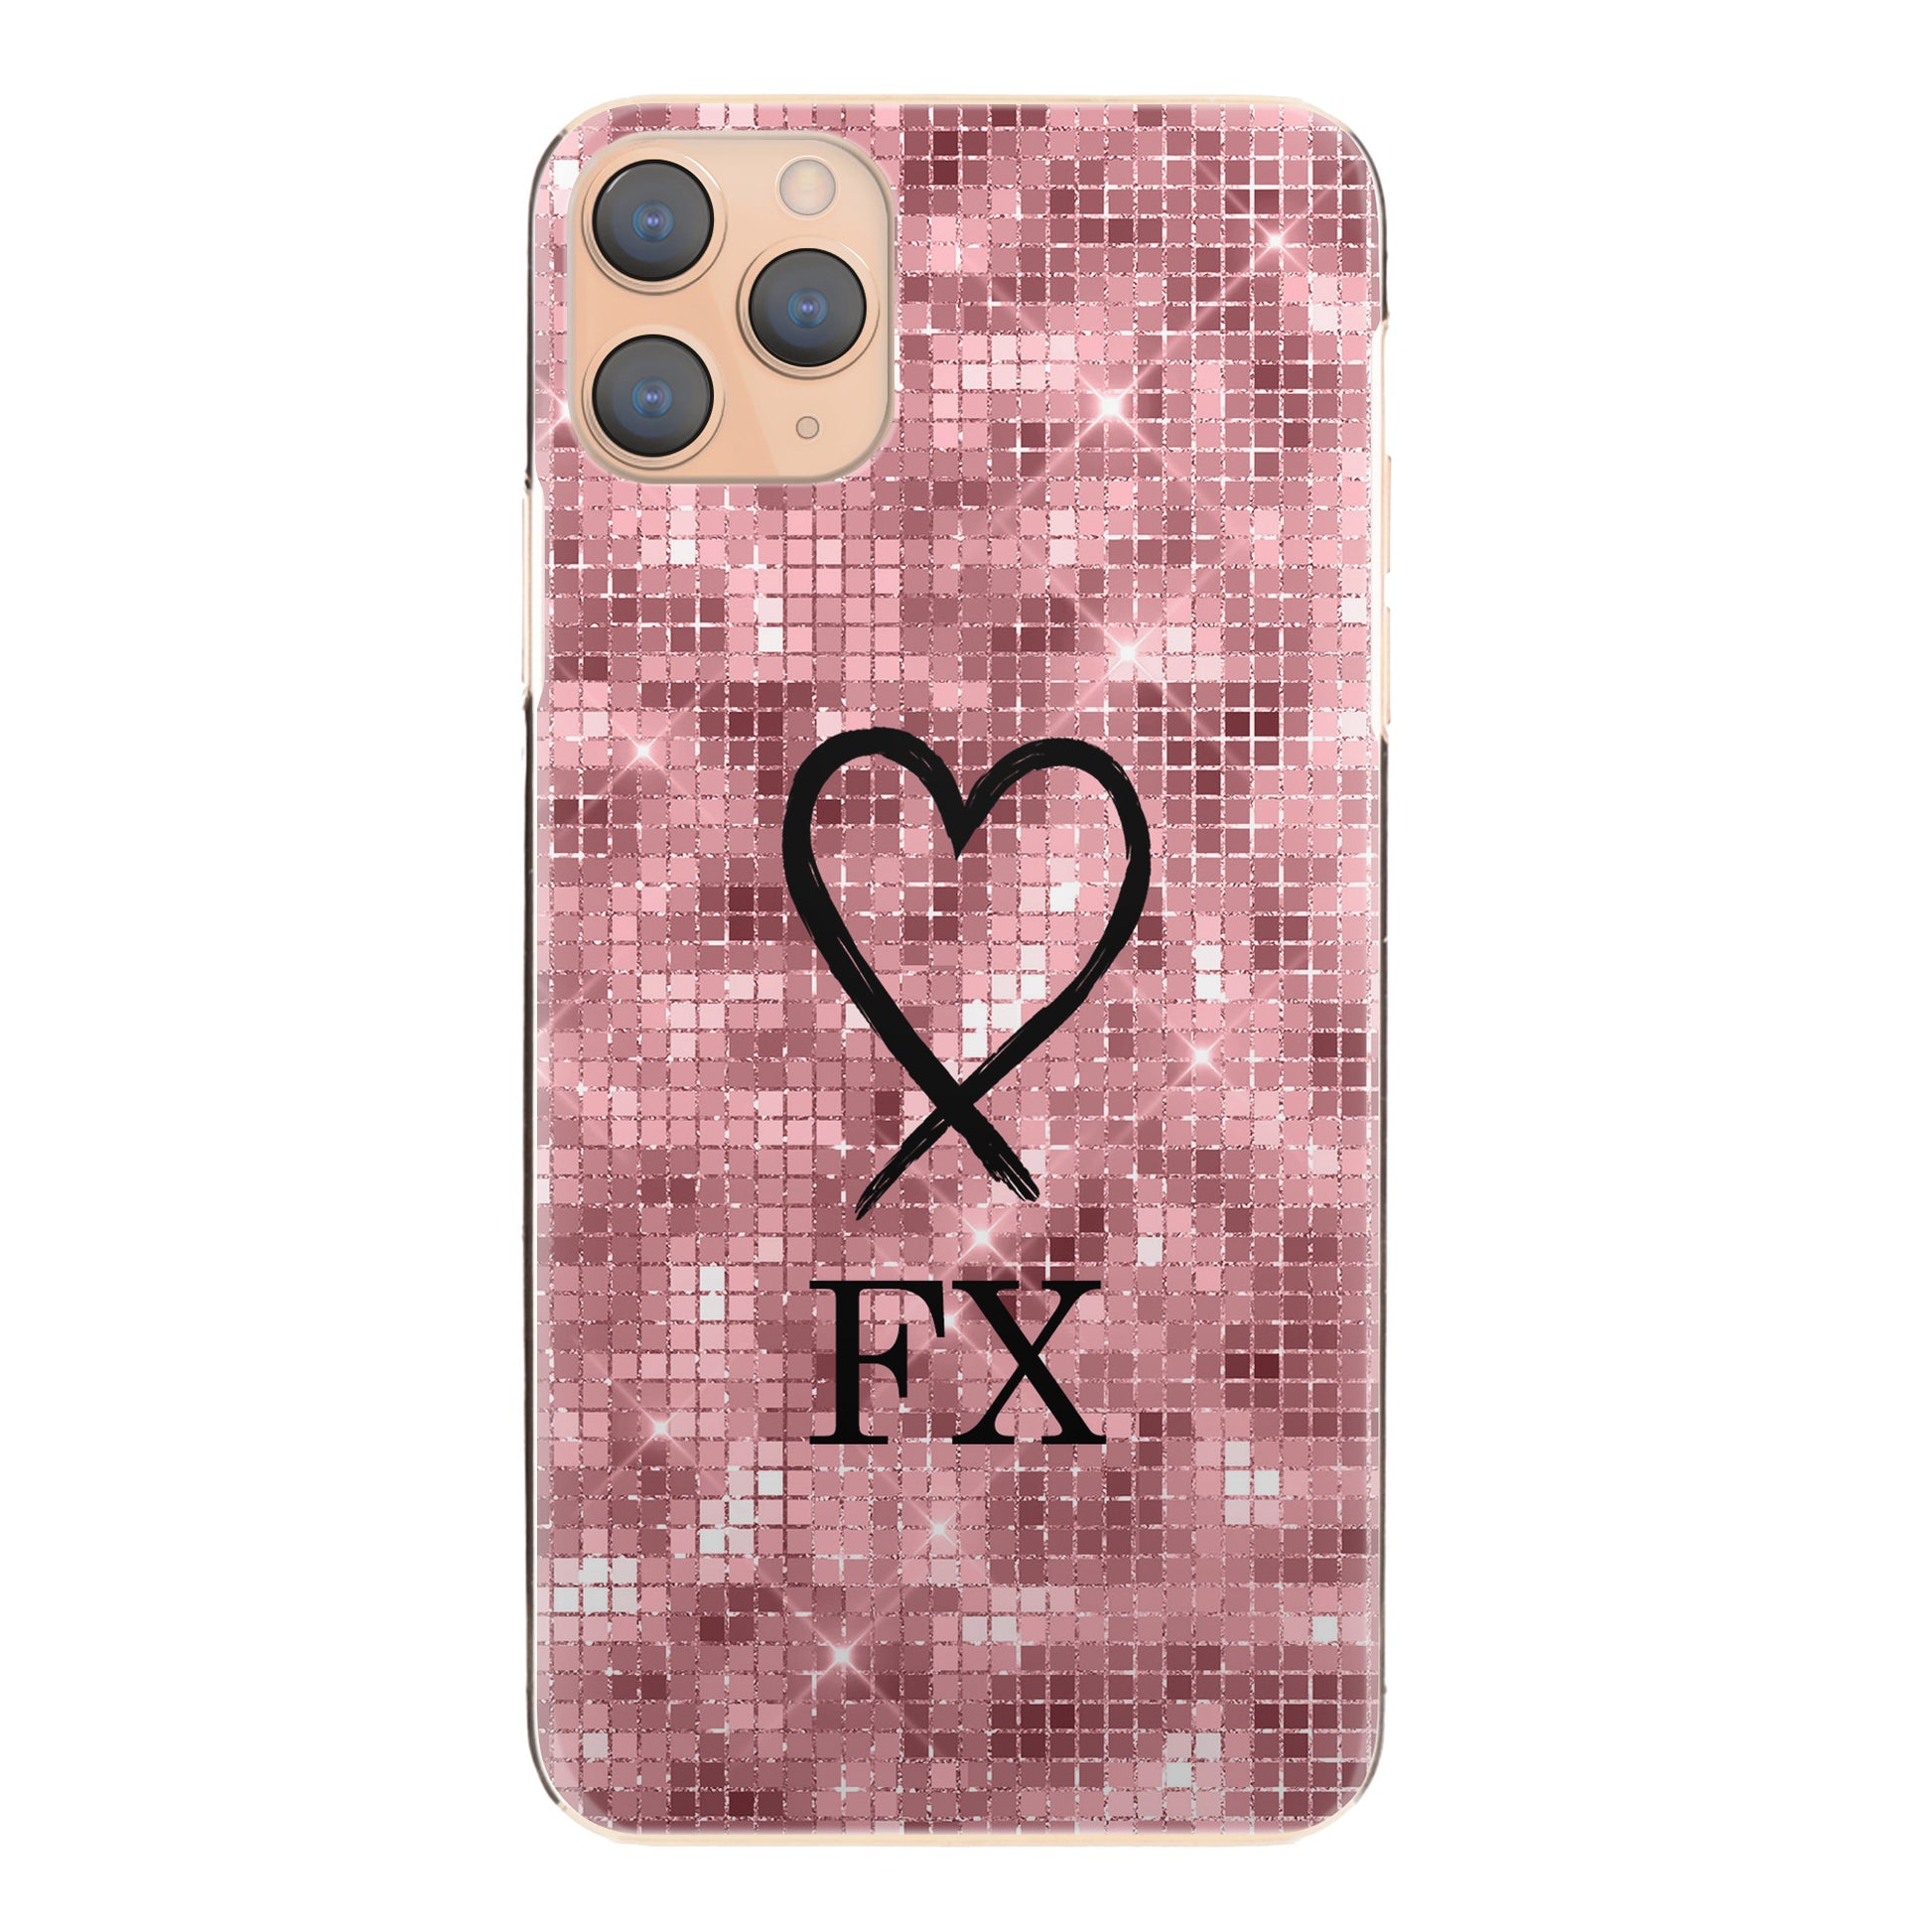 Personalised Honor Phone Hard Case with Heart Sketch and Initials on Pink Disco Ball